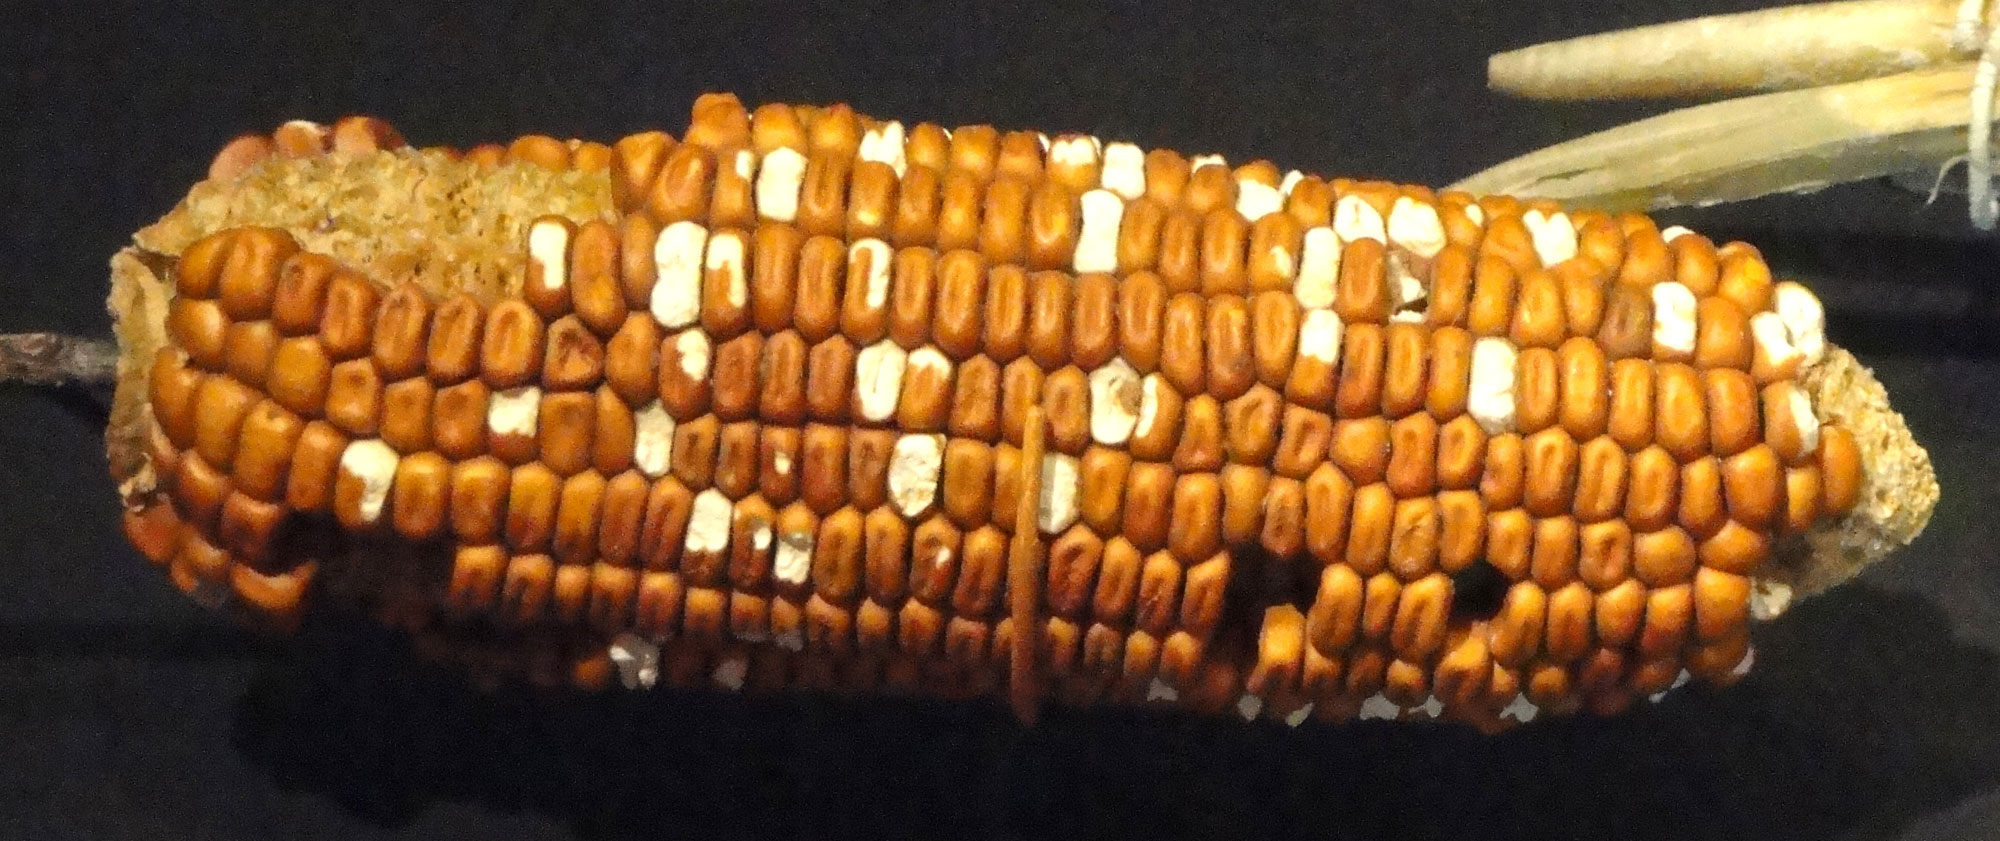 Photograph of an ear of maize from 900 to 1275 AD, found in Sheep Horn Alcove, Utah, U.S.A. The photo shows an oblong ear of corn with brownish-yellow kernels.